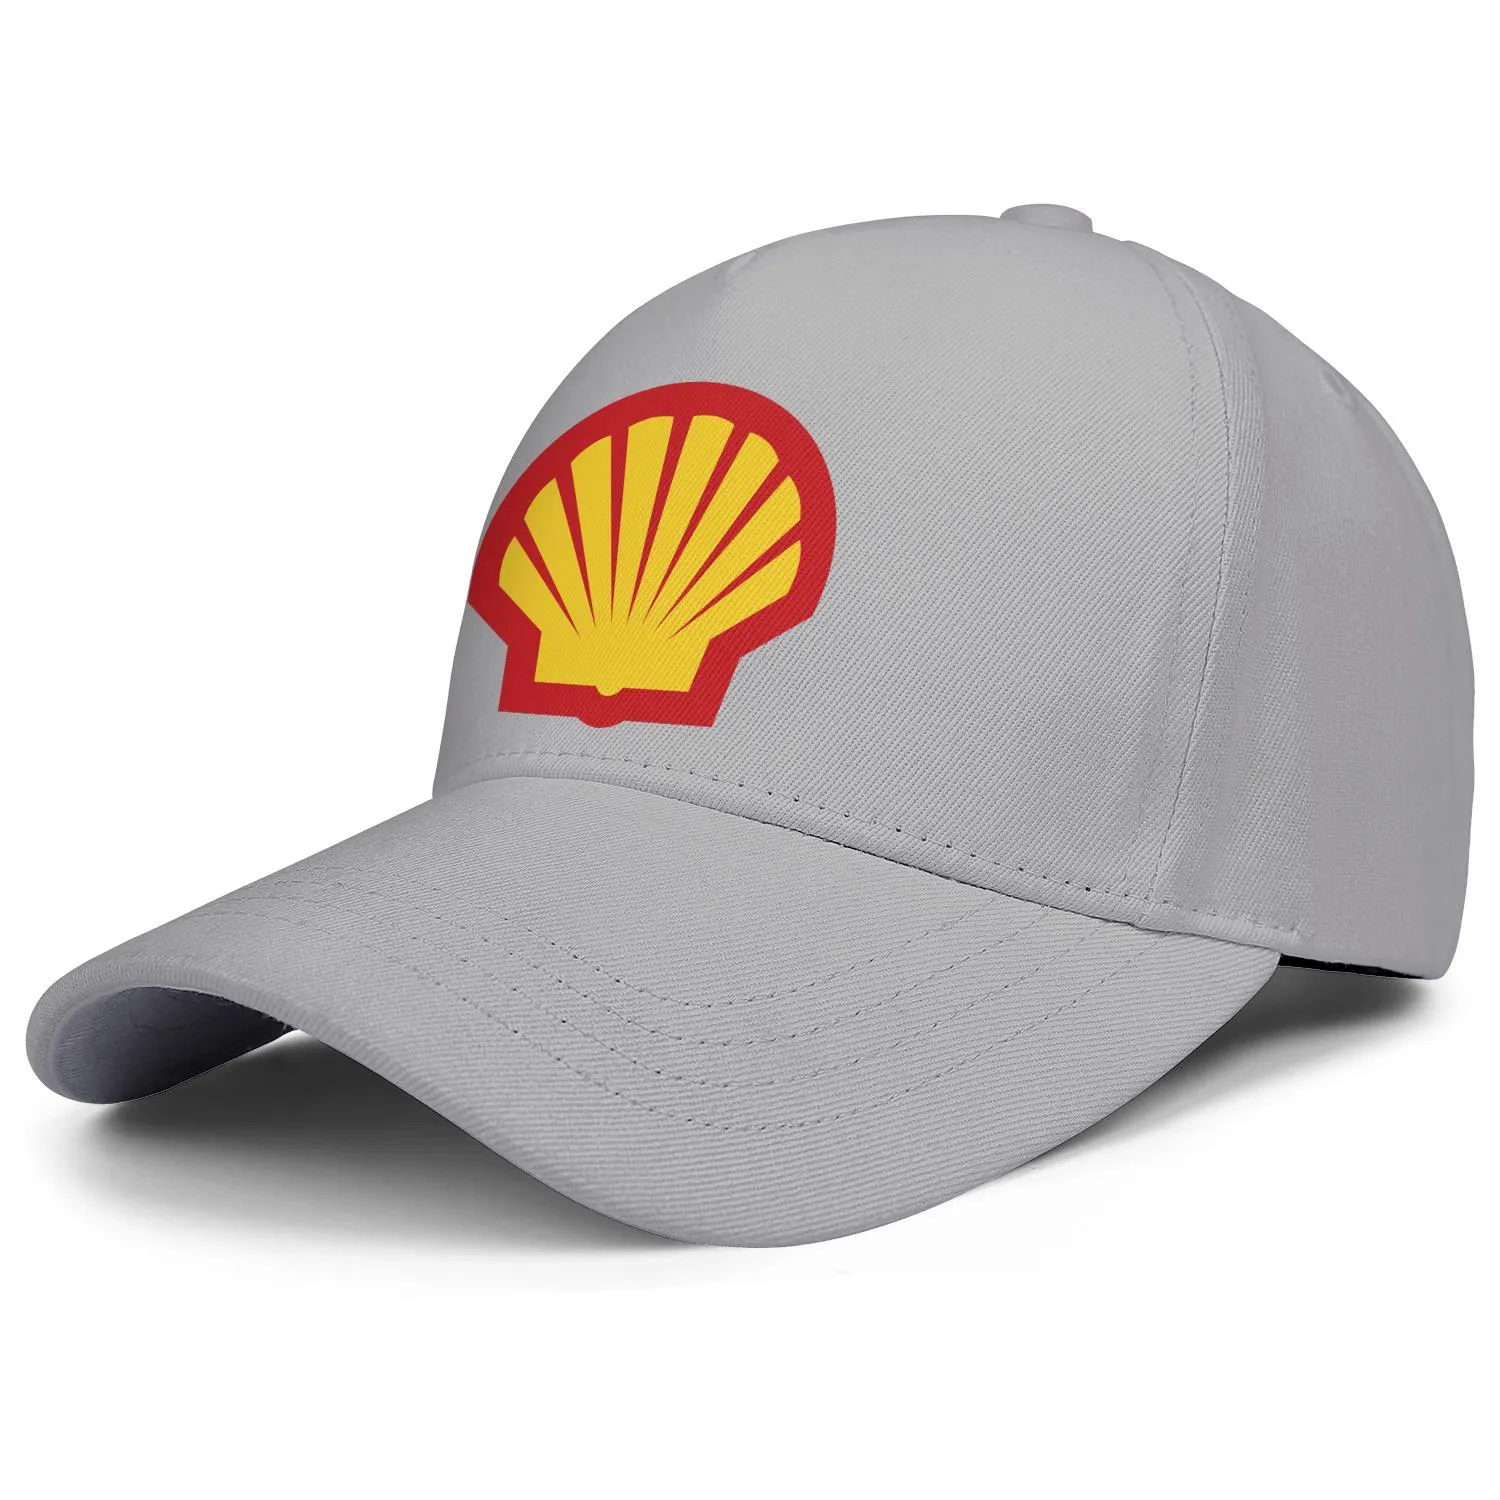 Shell gasoline gas station logo mens and women adjustable trucker cap fitted vintage cute baseballhats locator Gasoline symbo903211785853